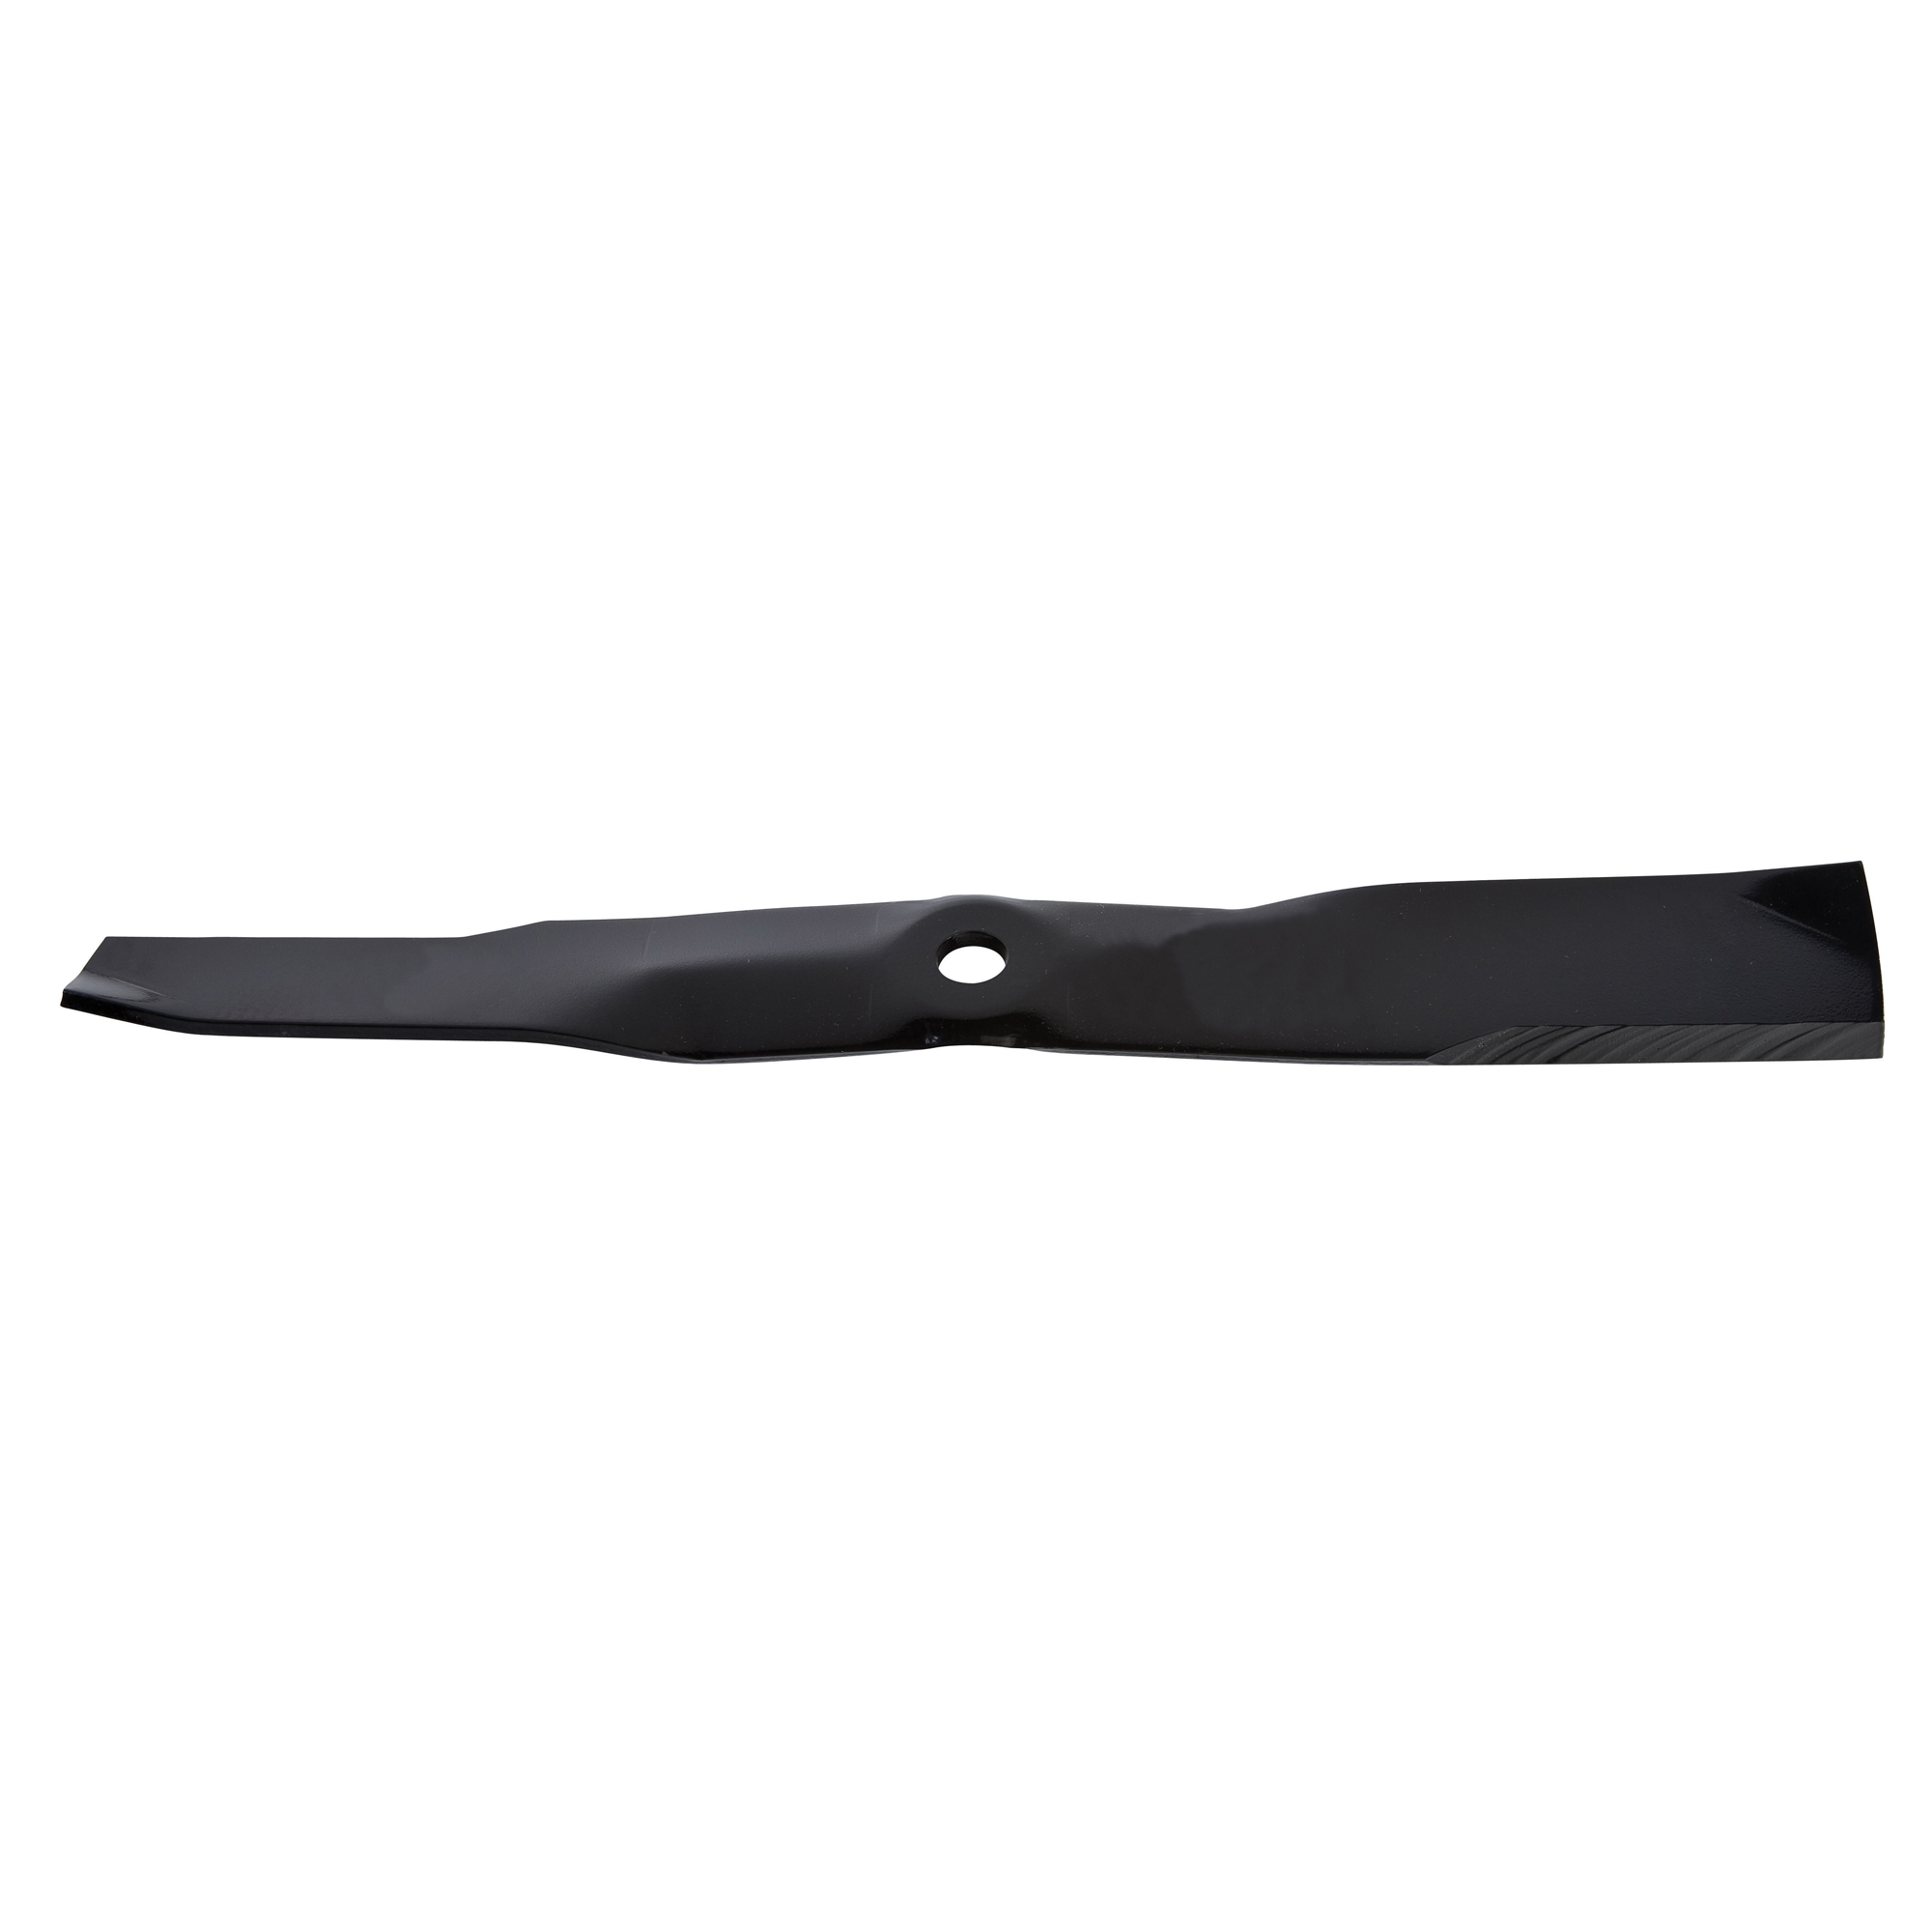 Lawn Mower Blade 21 9/16 Jd (3) For 62C Deck